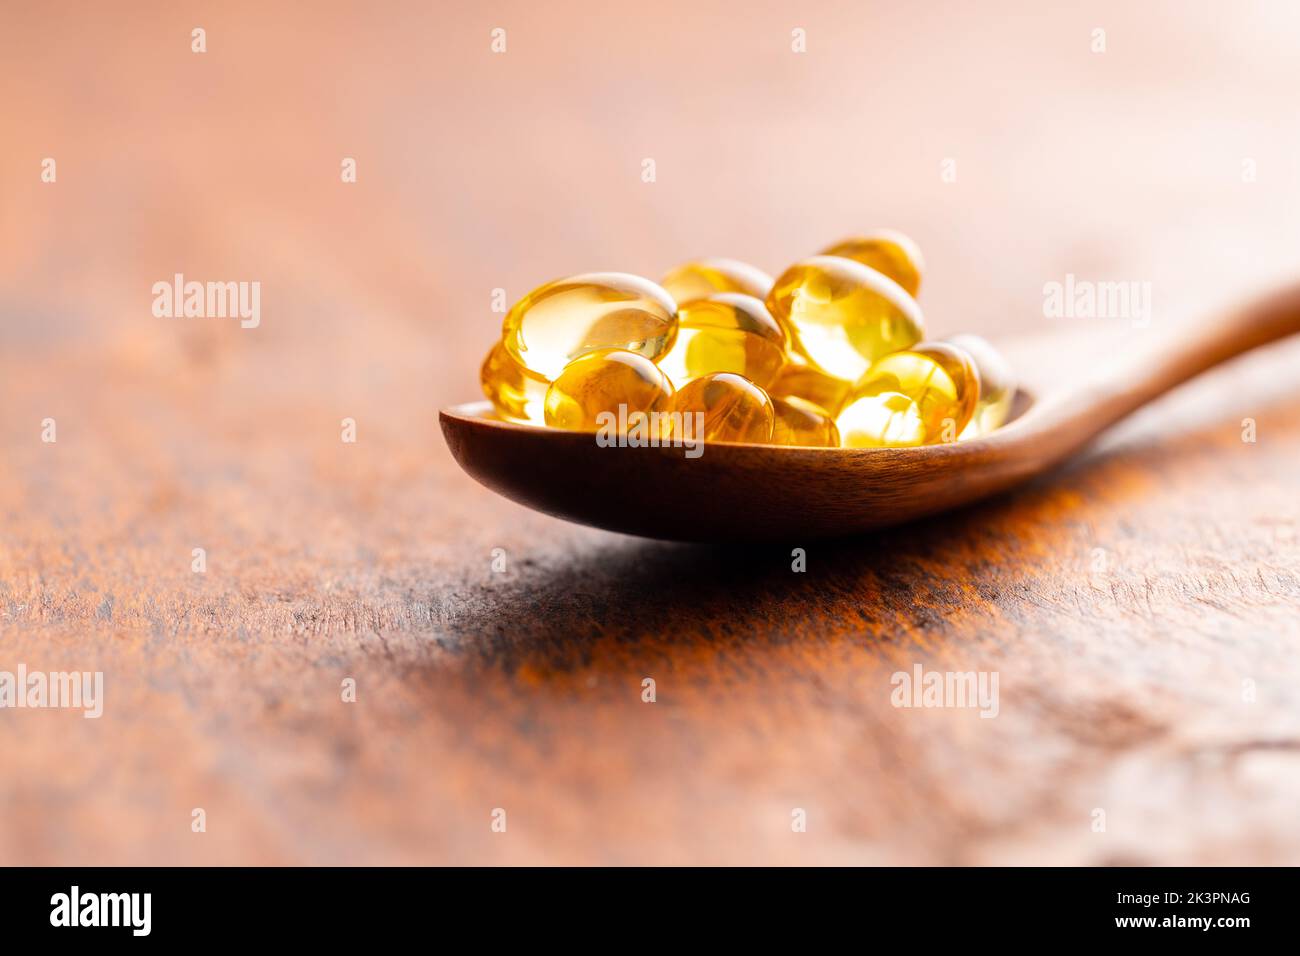 Fish oil capsules. Yellow omega 3 pills in spoon on the wooden table. Stock Photo